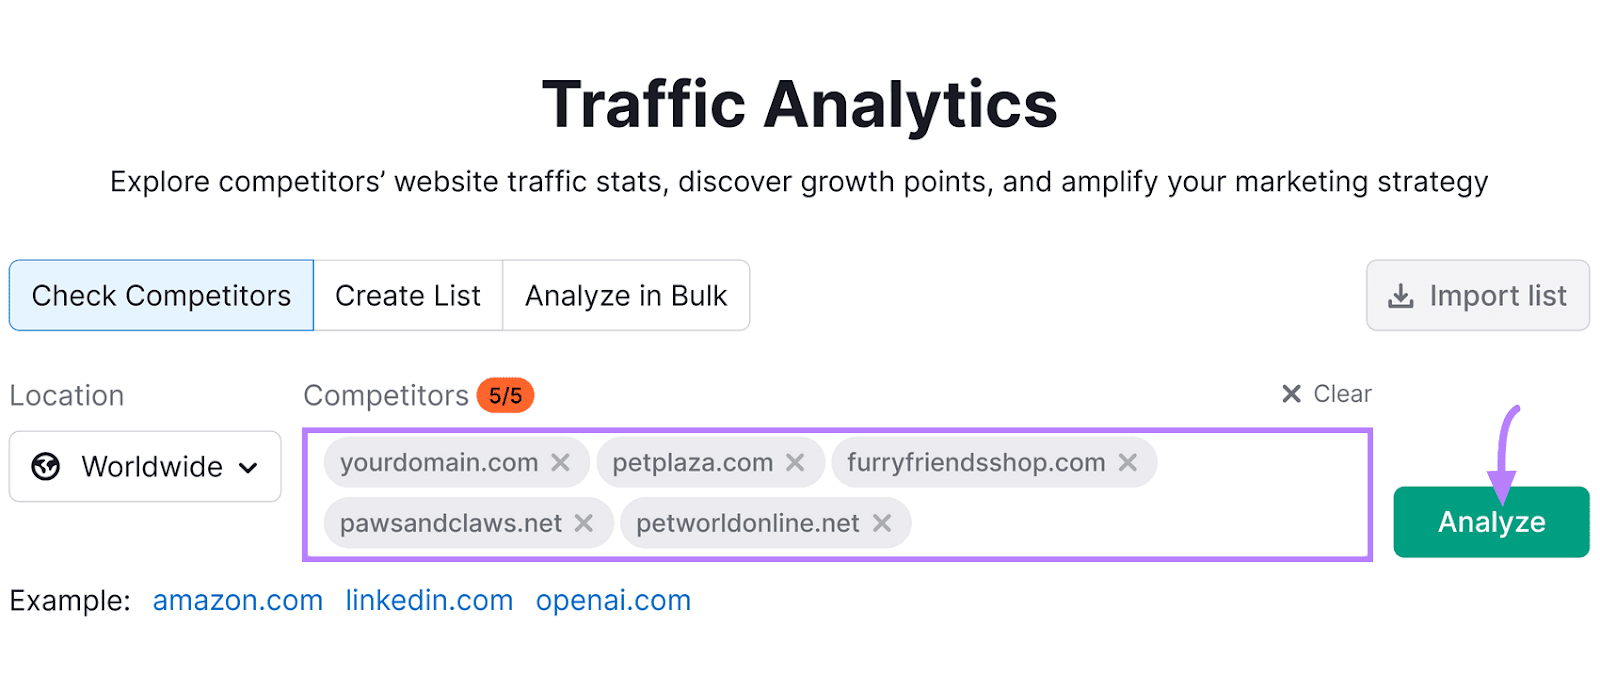 Traffic Analytics interface with competitor domain entries and an "Analyze" button with a purple arrow pointing to it.